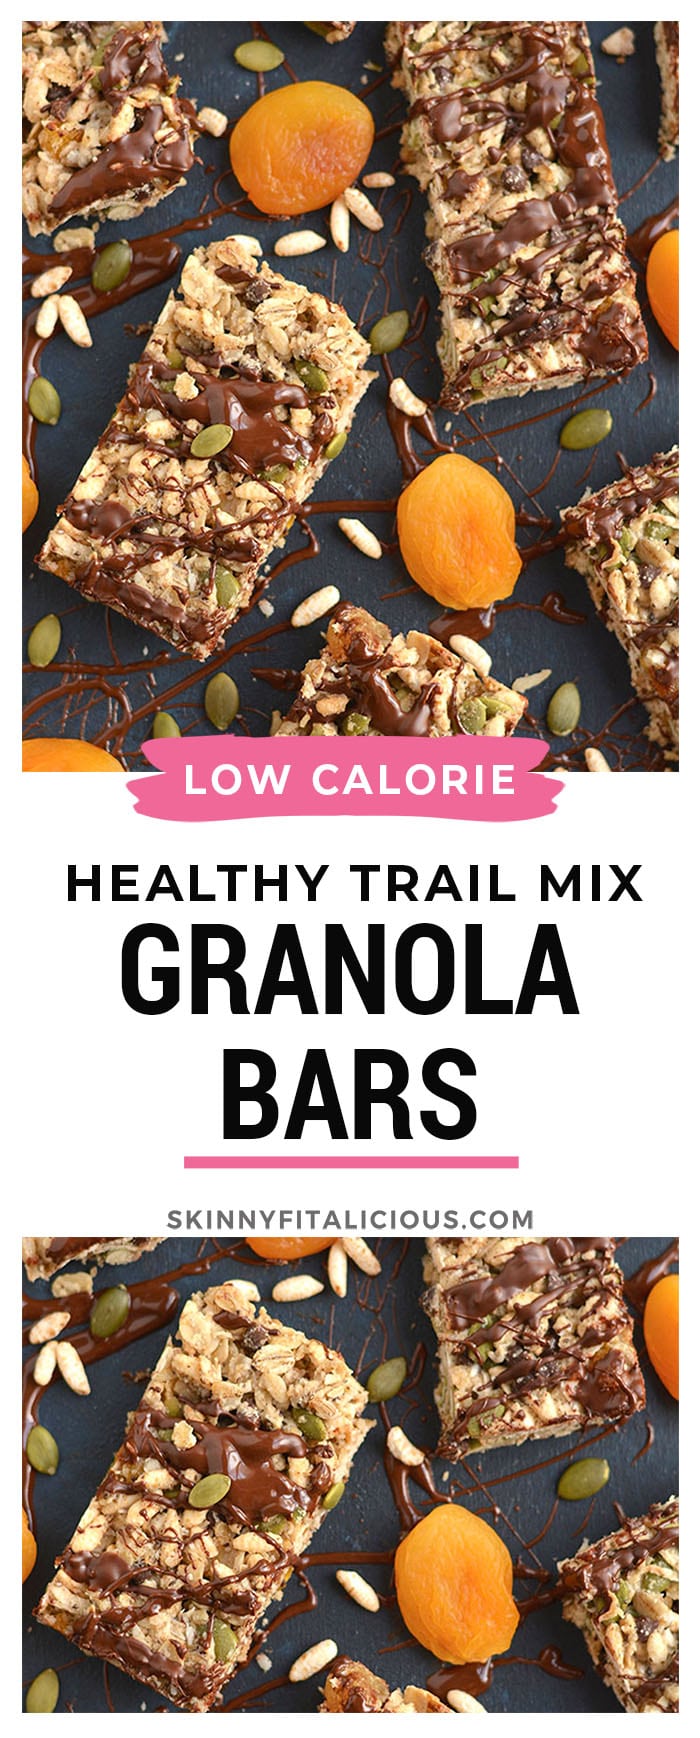 These homemade Trail Mix Granola Bars are easy to make with apricots, gluten free oats, brown rice cereal, pumpkin seeds and chocolate. A sweet, salty, chewy bar that's naturally sweetened.  A wholesome recipe for a nutritious snack or breakfast to go! Gluten Free + Low Calorie + Vegan